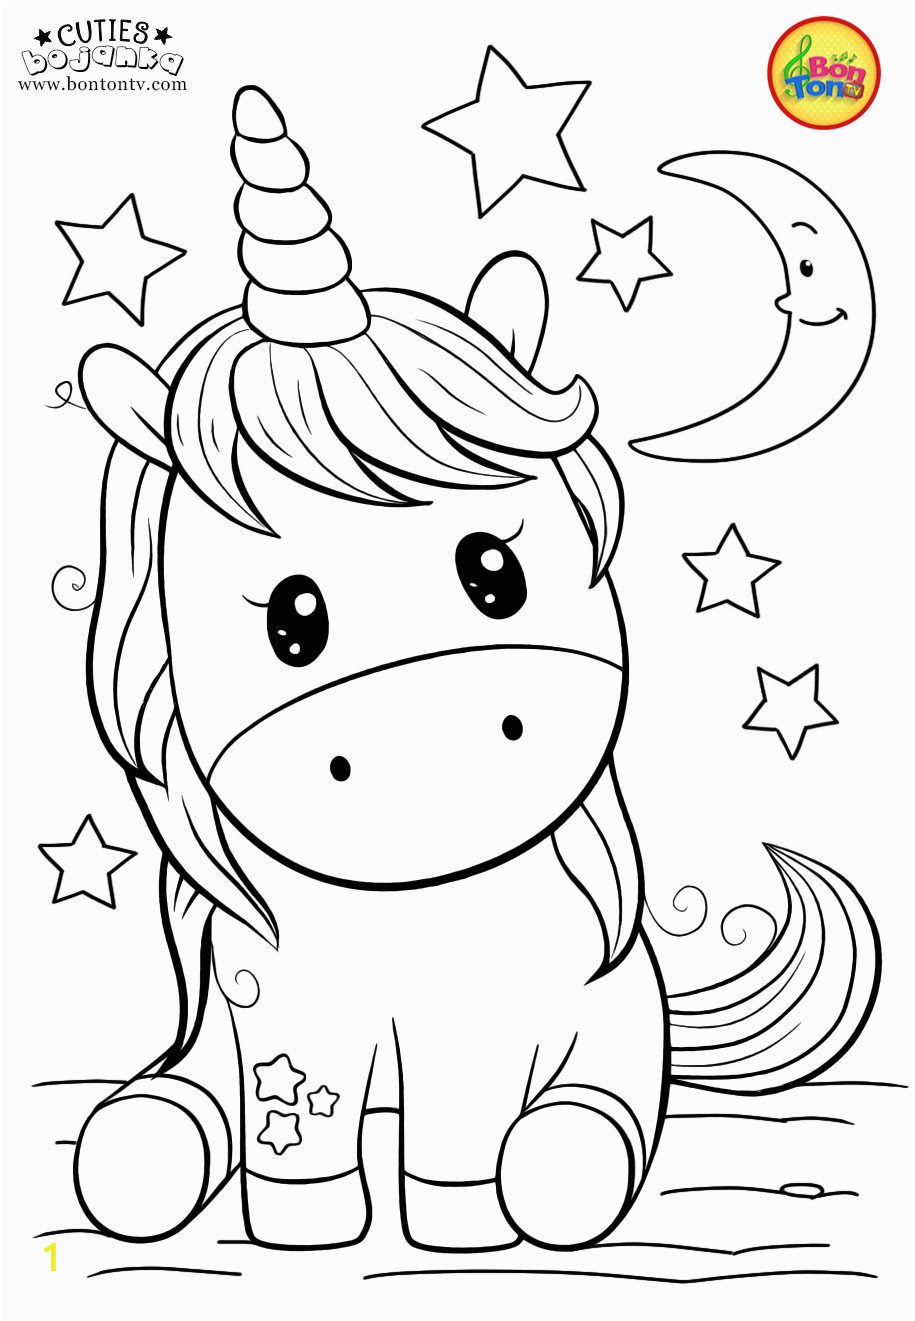 Coloring Pages for Kids Free Cuties Coloring Pages for Kids Free Preschool Printables